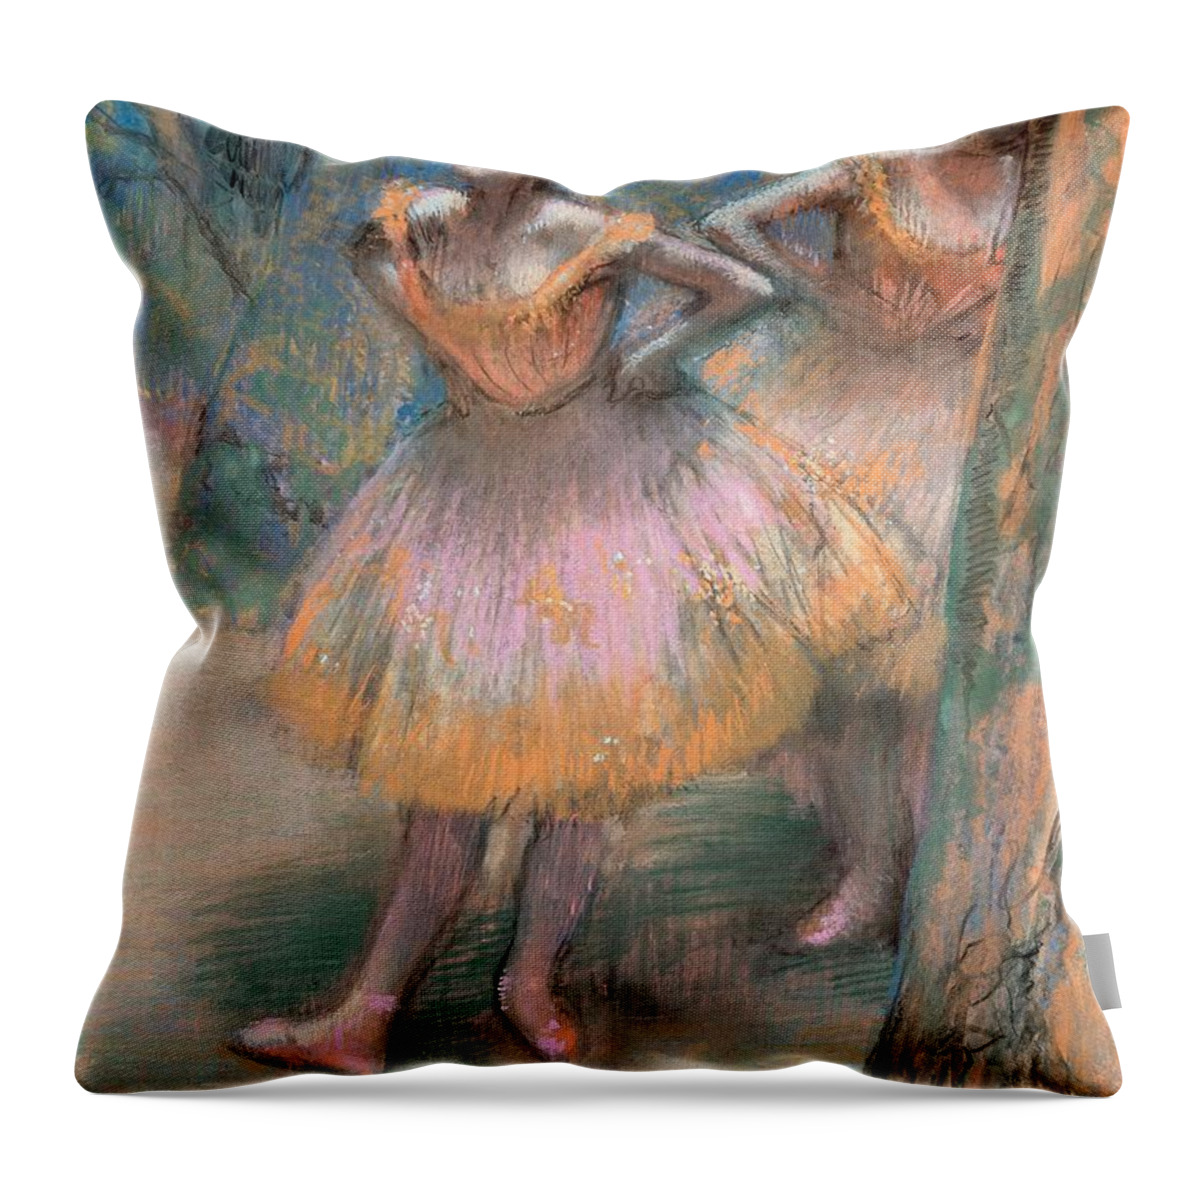 Edgar Degas Throw Pillow featuring the painting Two Dancers #36 by Edgar Degas